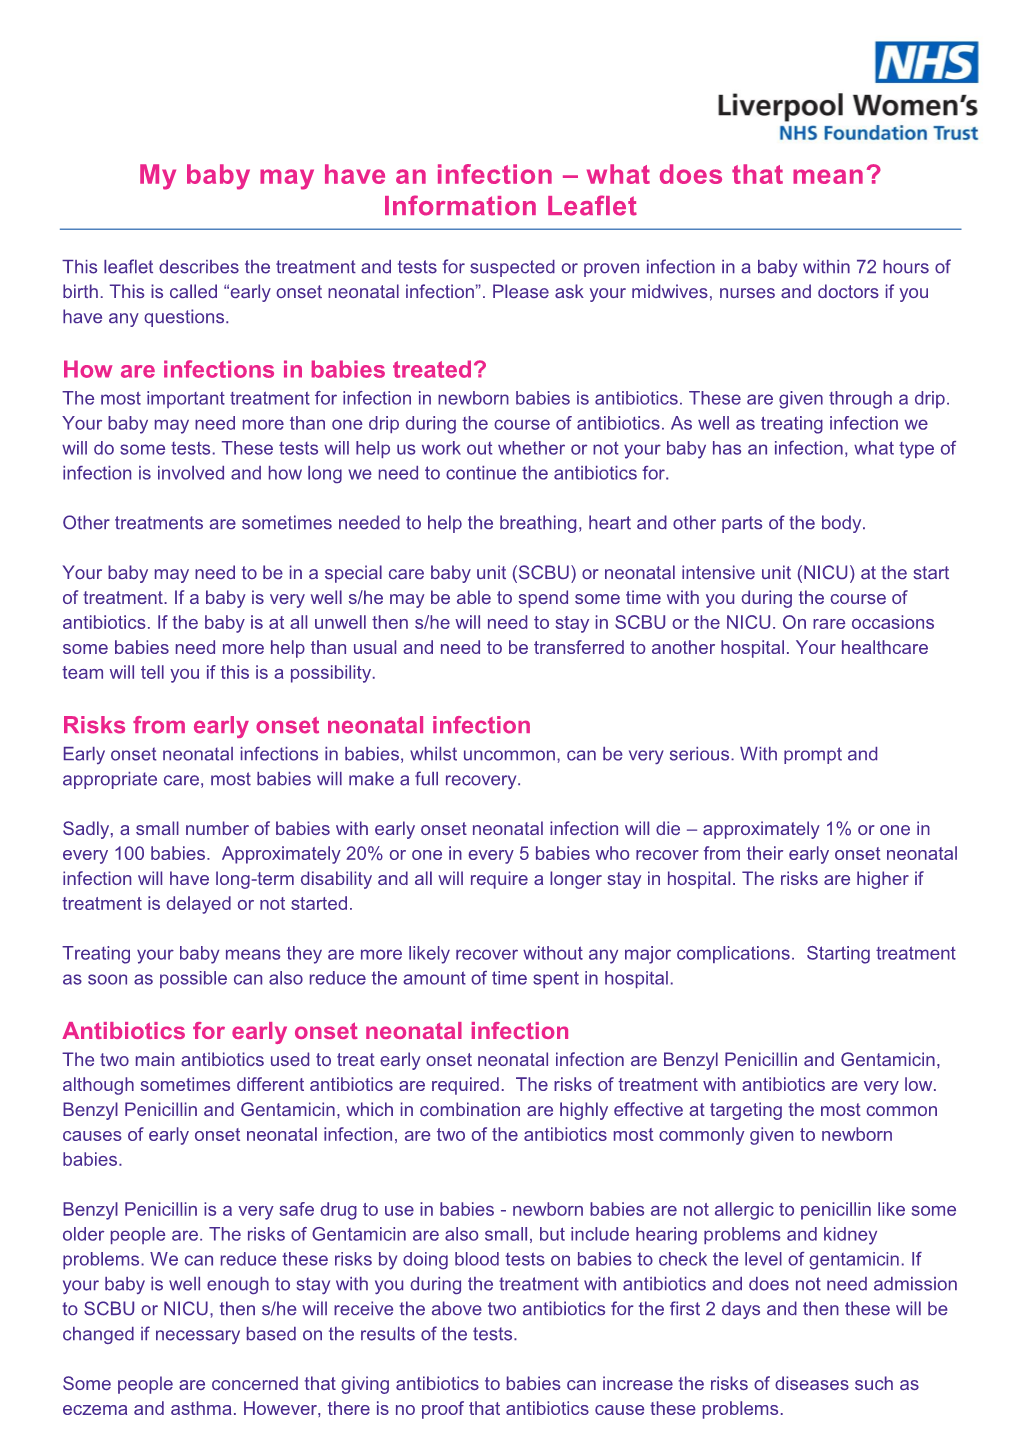 My Baby May Have an Infection – What Does That Mean? Information Leaflet